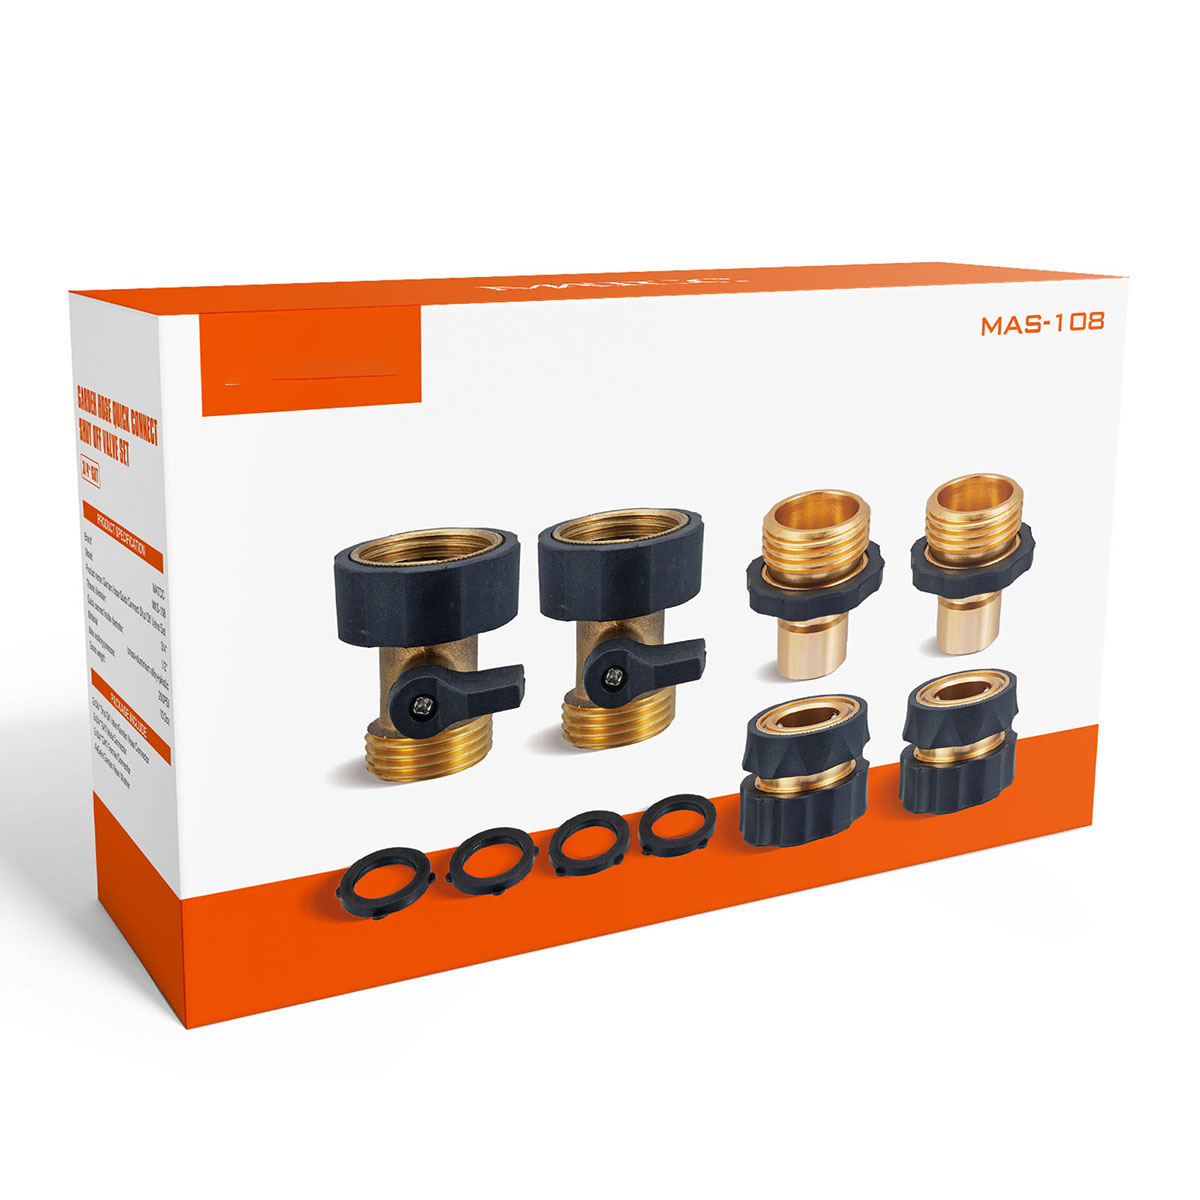 34-Garden-Hose-Quick-Connect-Water-Hose-Fit-Brass-Female-Male-Connector-Set-1943824-9